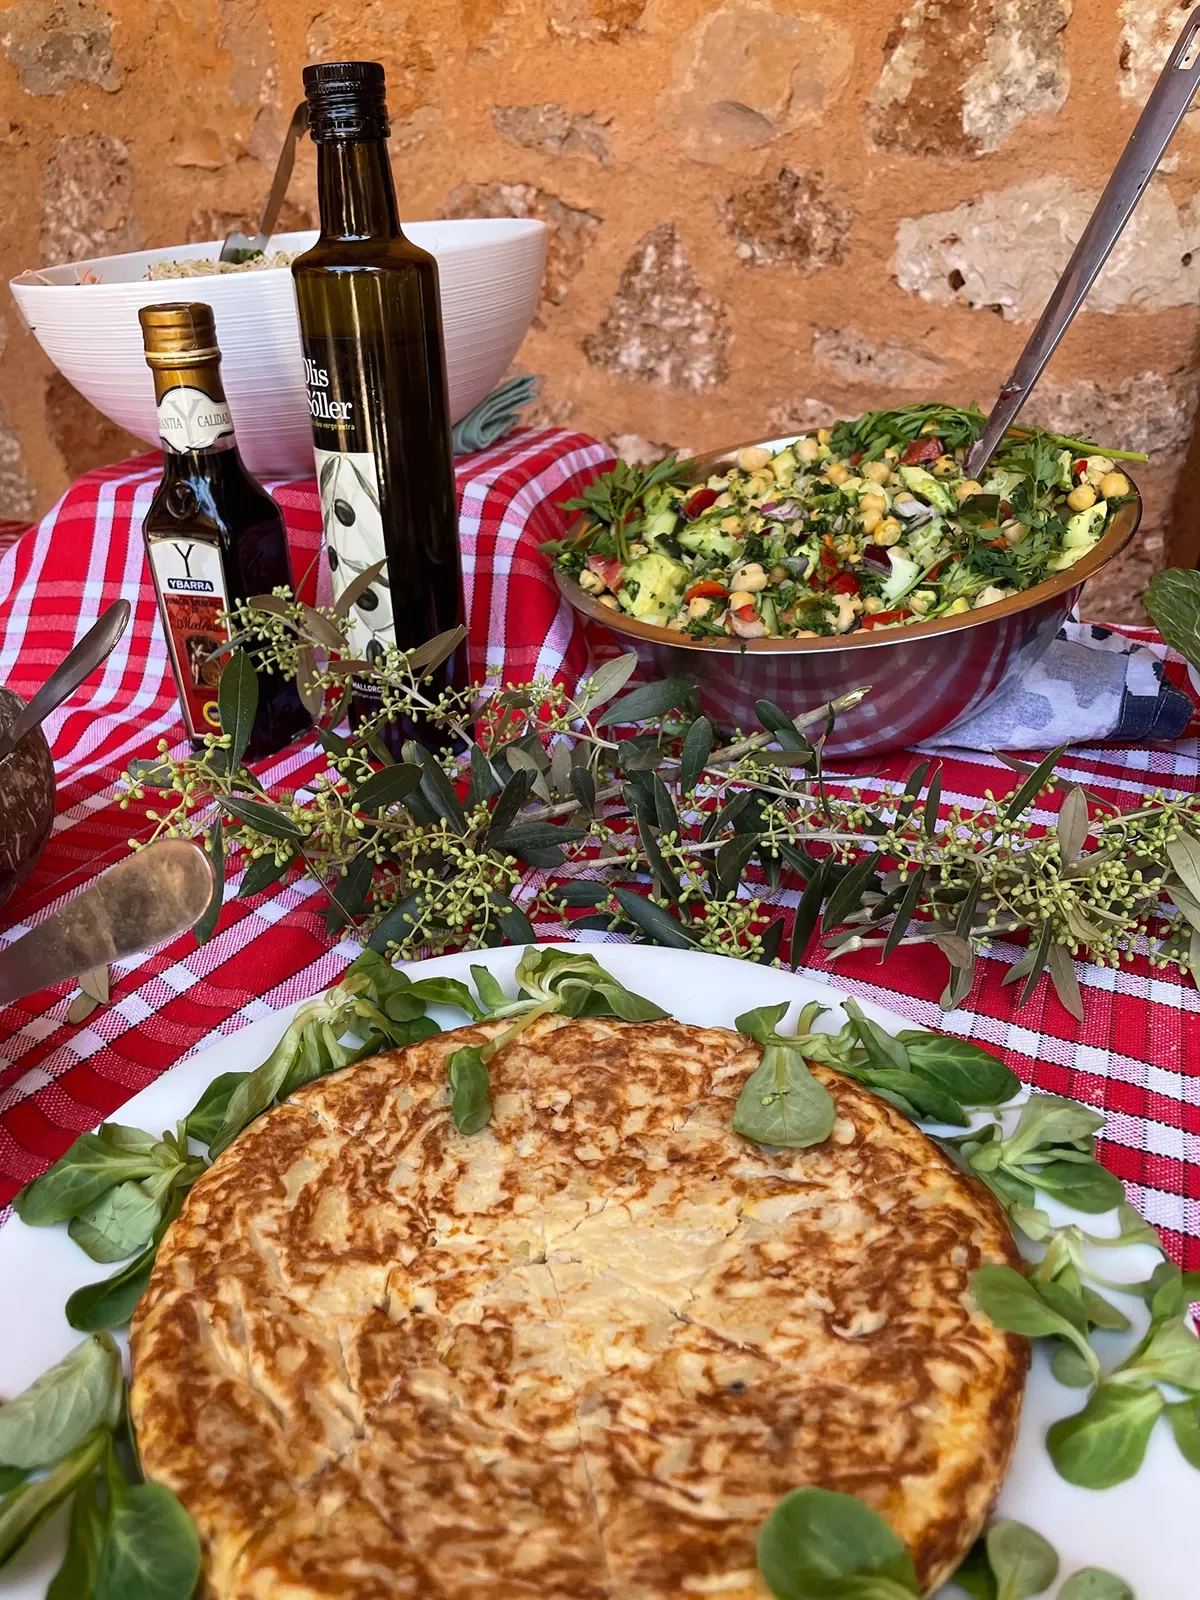 Table with snacks, Spanish tortilla and salad.